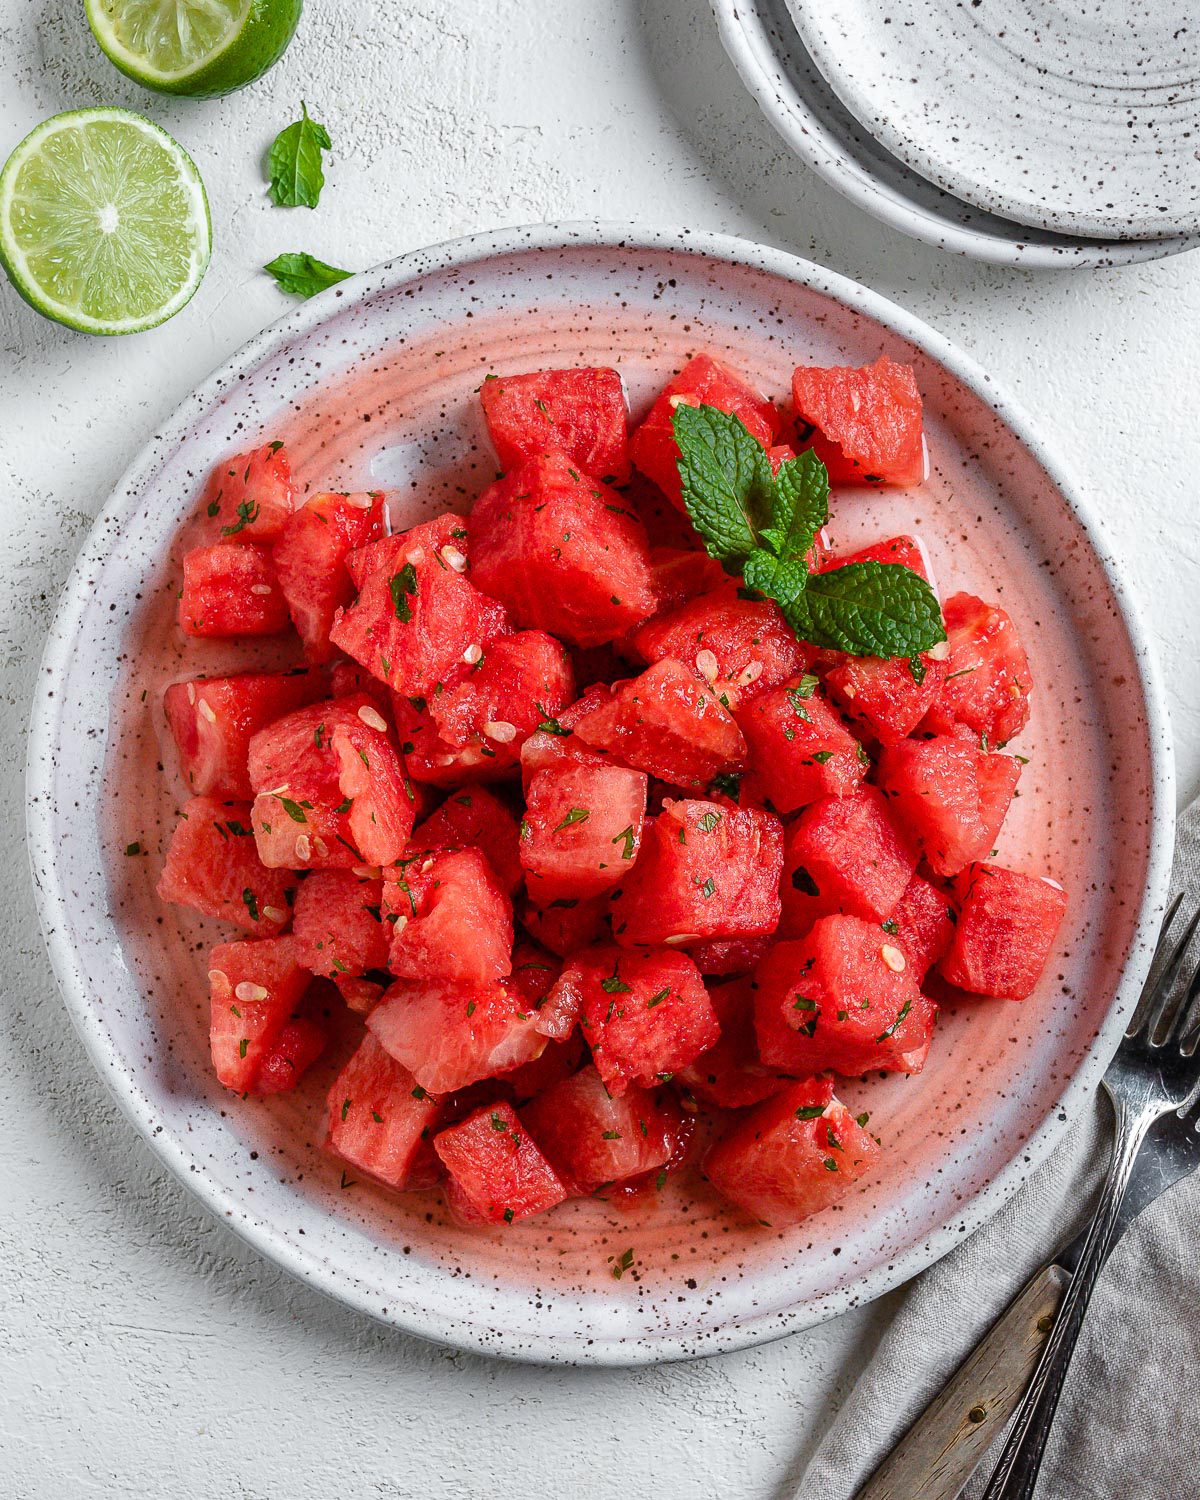 completed Vegan Watermelon Lime Mint Salad on a white plate against a white surface